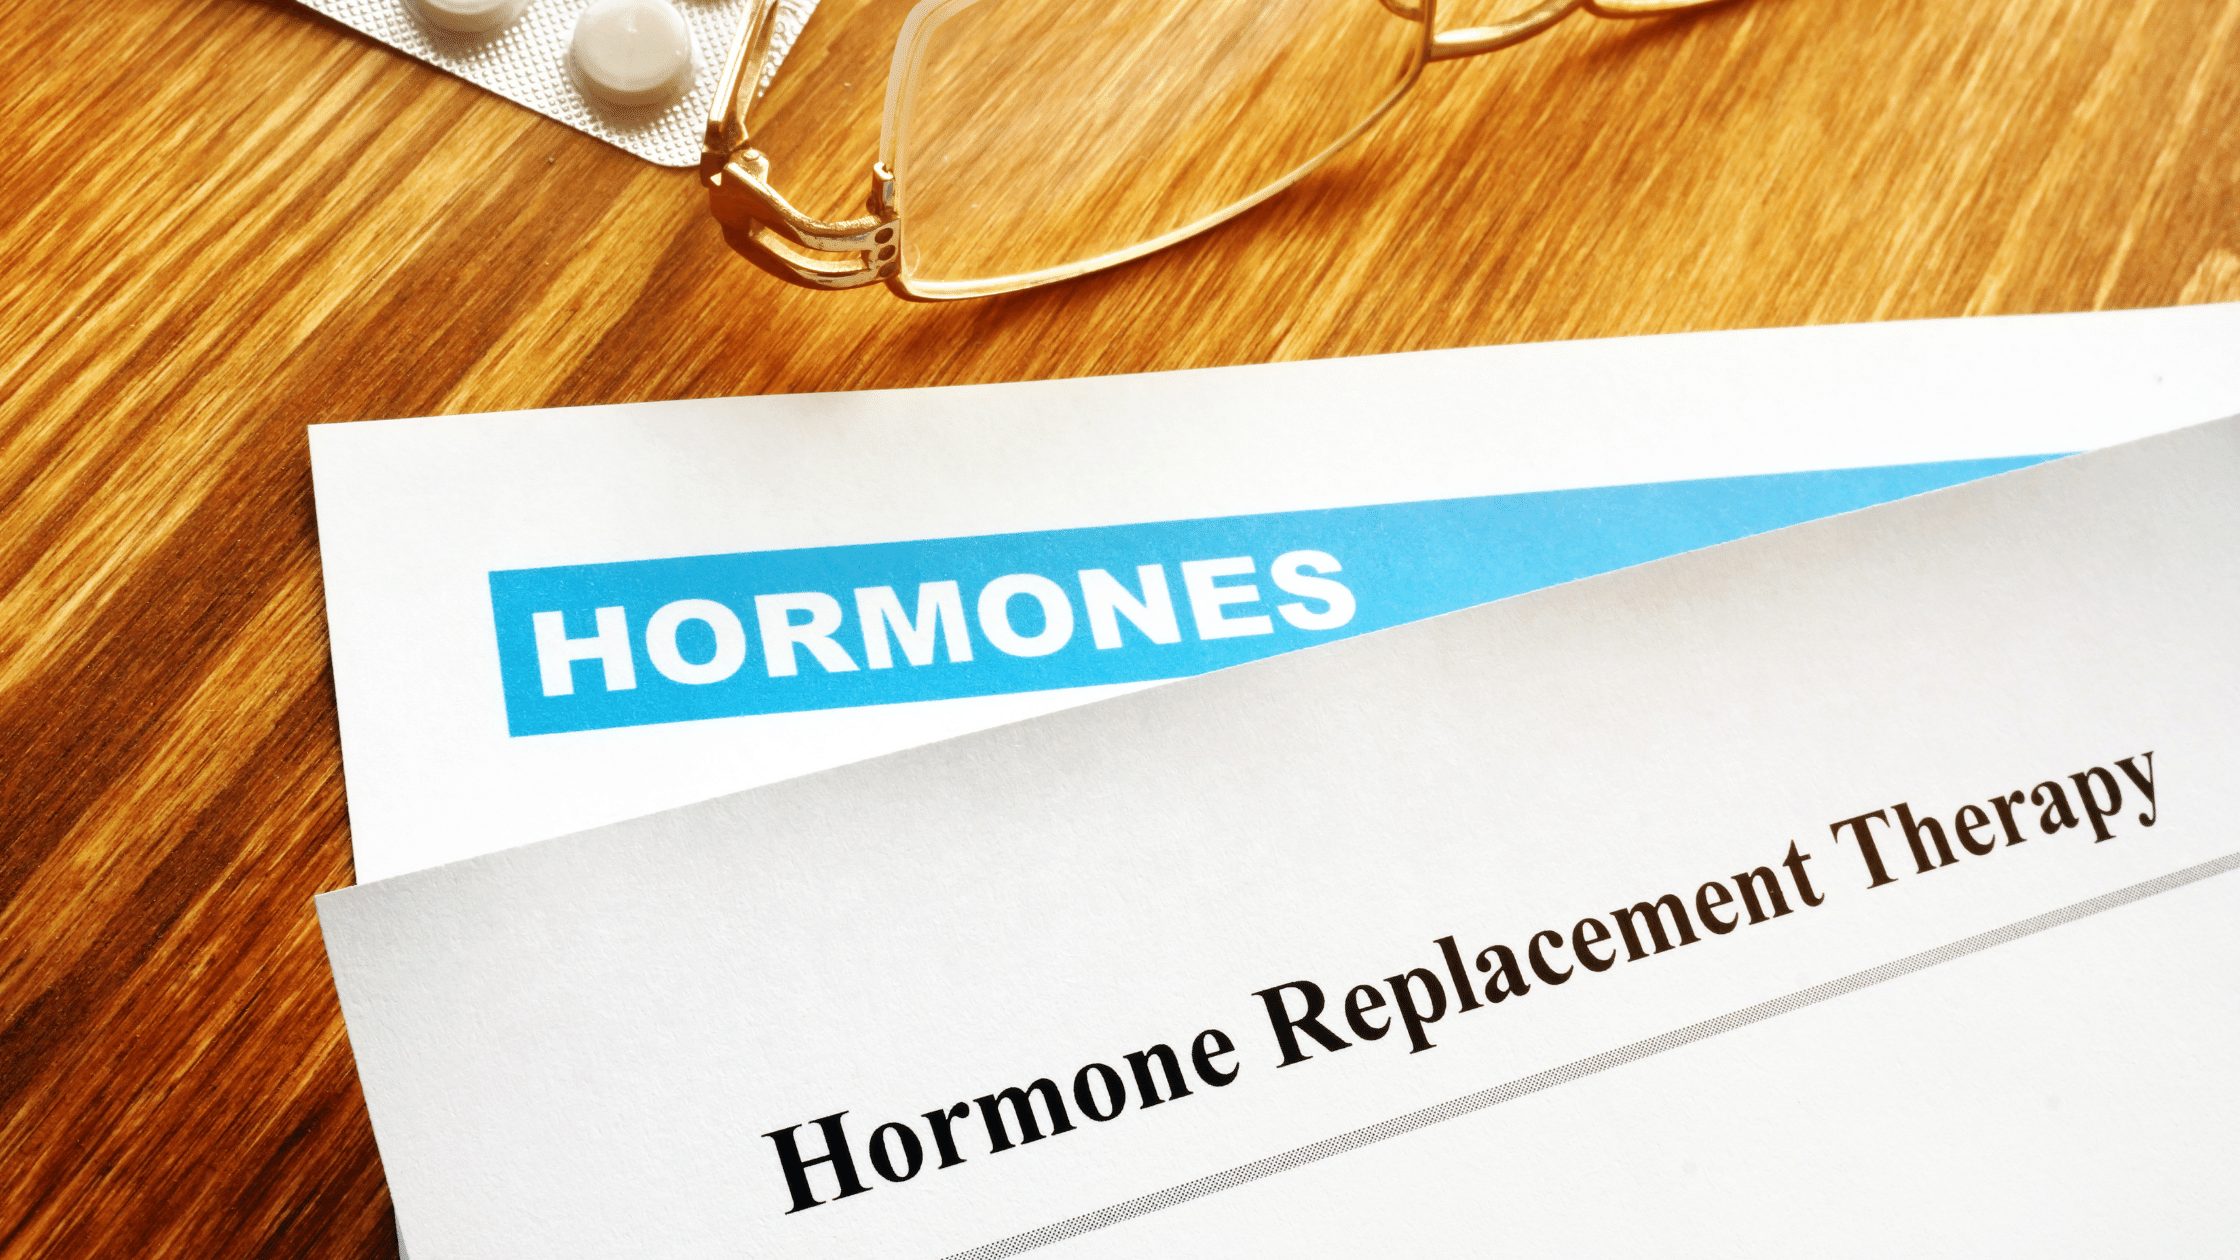 Hormone Replacement Therapy printed on a graphic